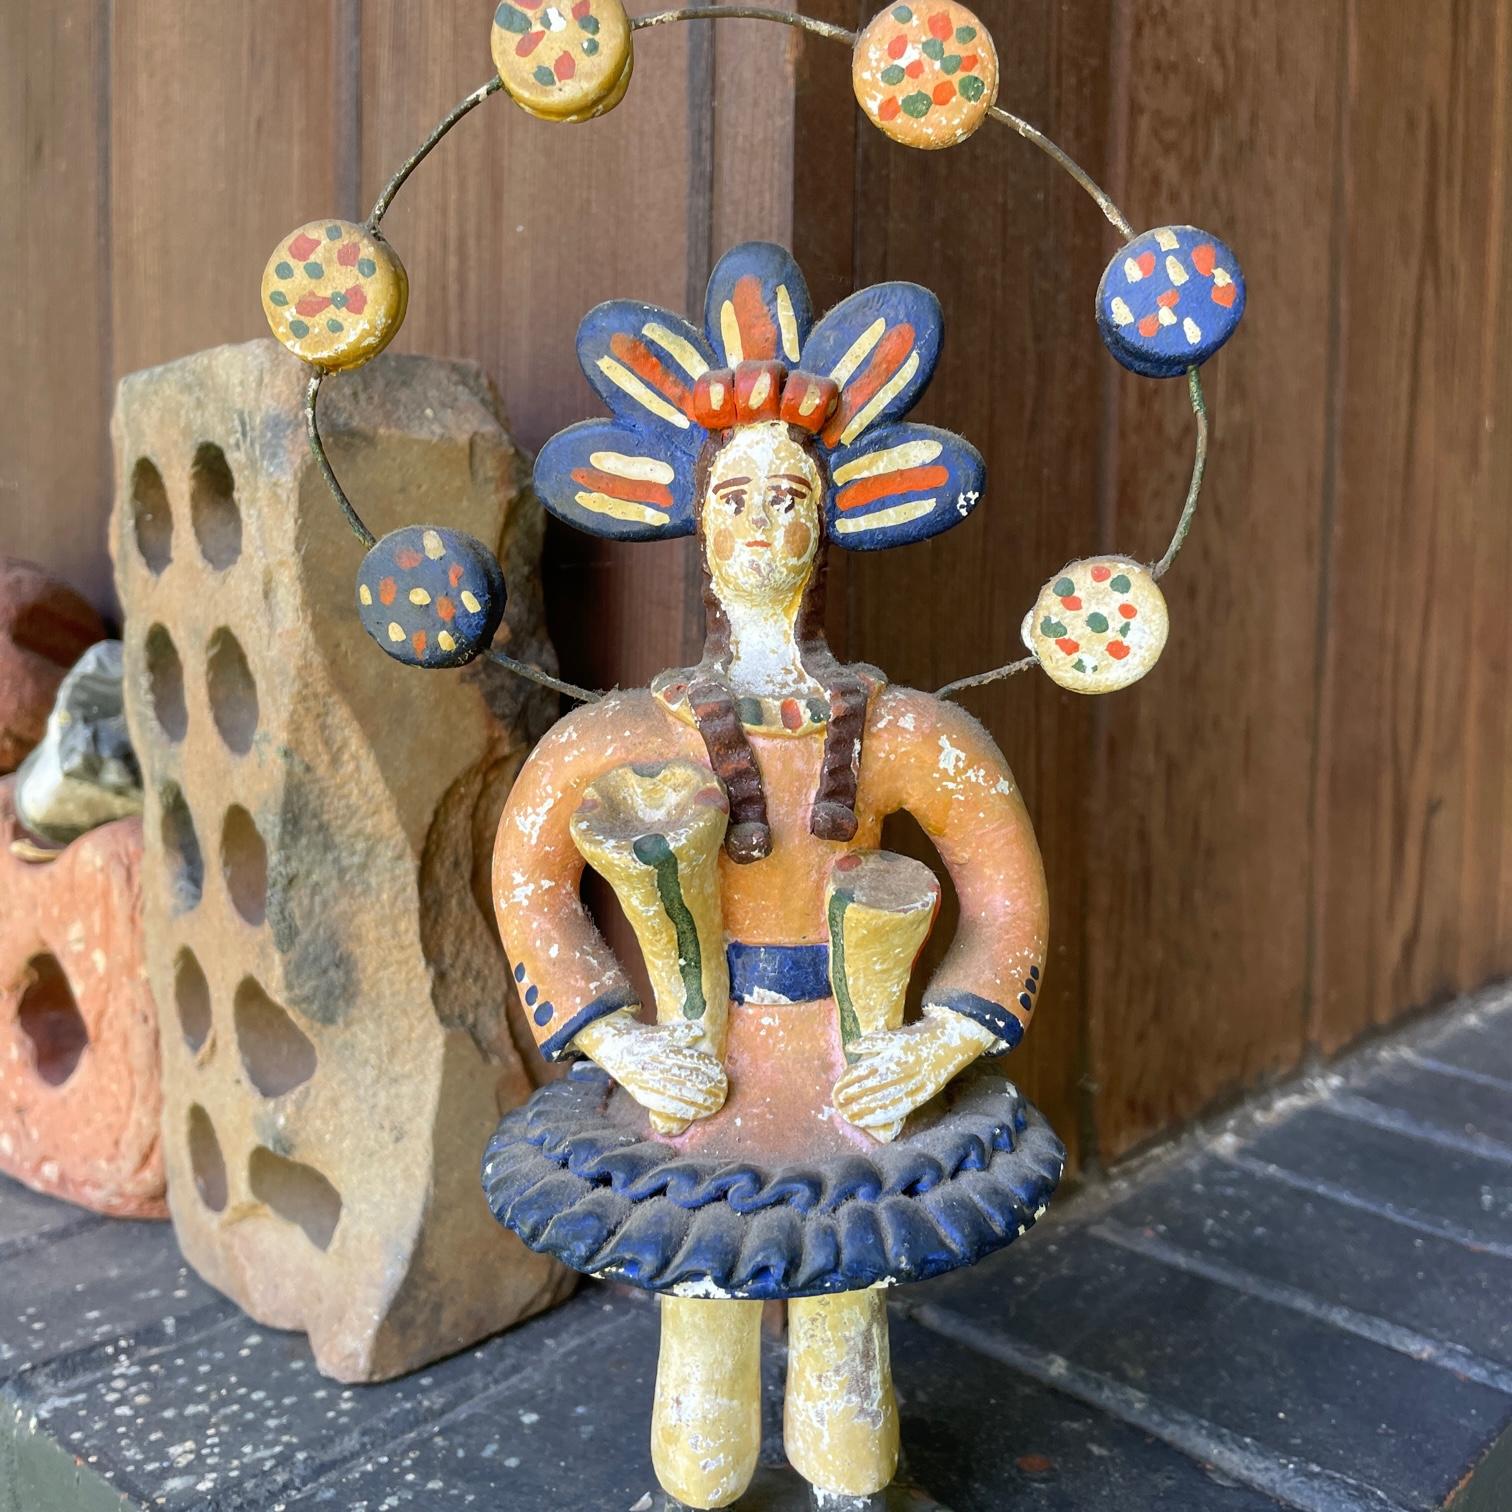 Vintage Folk Art Estremoz Clay World Heritage Figurine Portugal by Jose Moreira In Distressed Condition For Sale In Hyattsville, MD